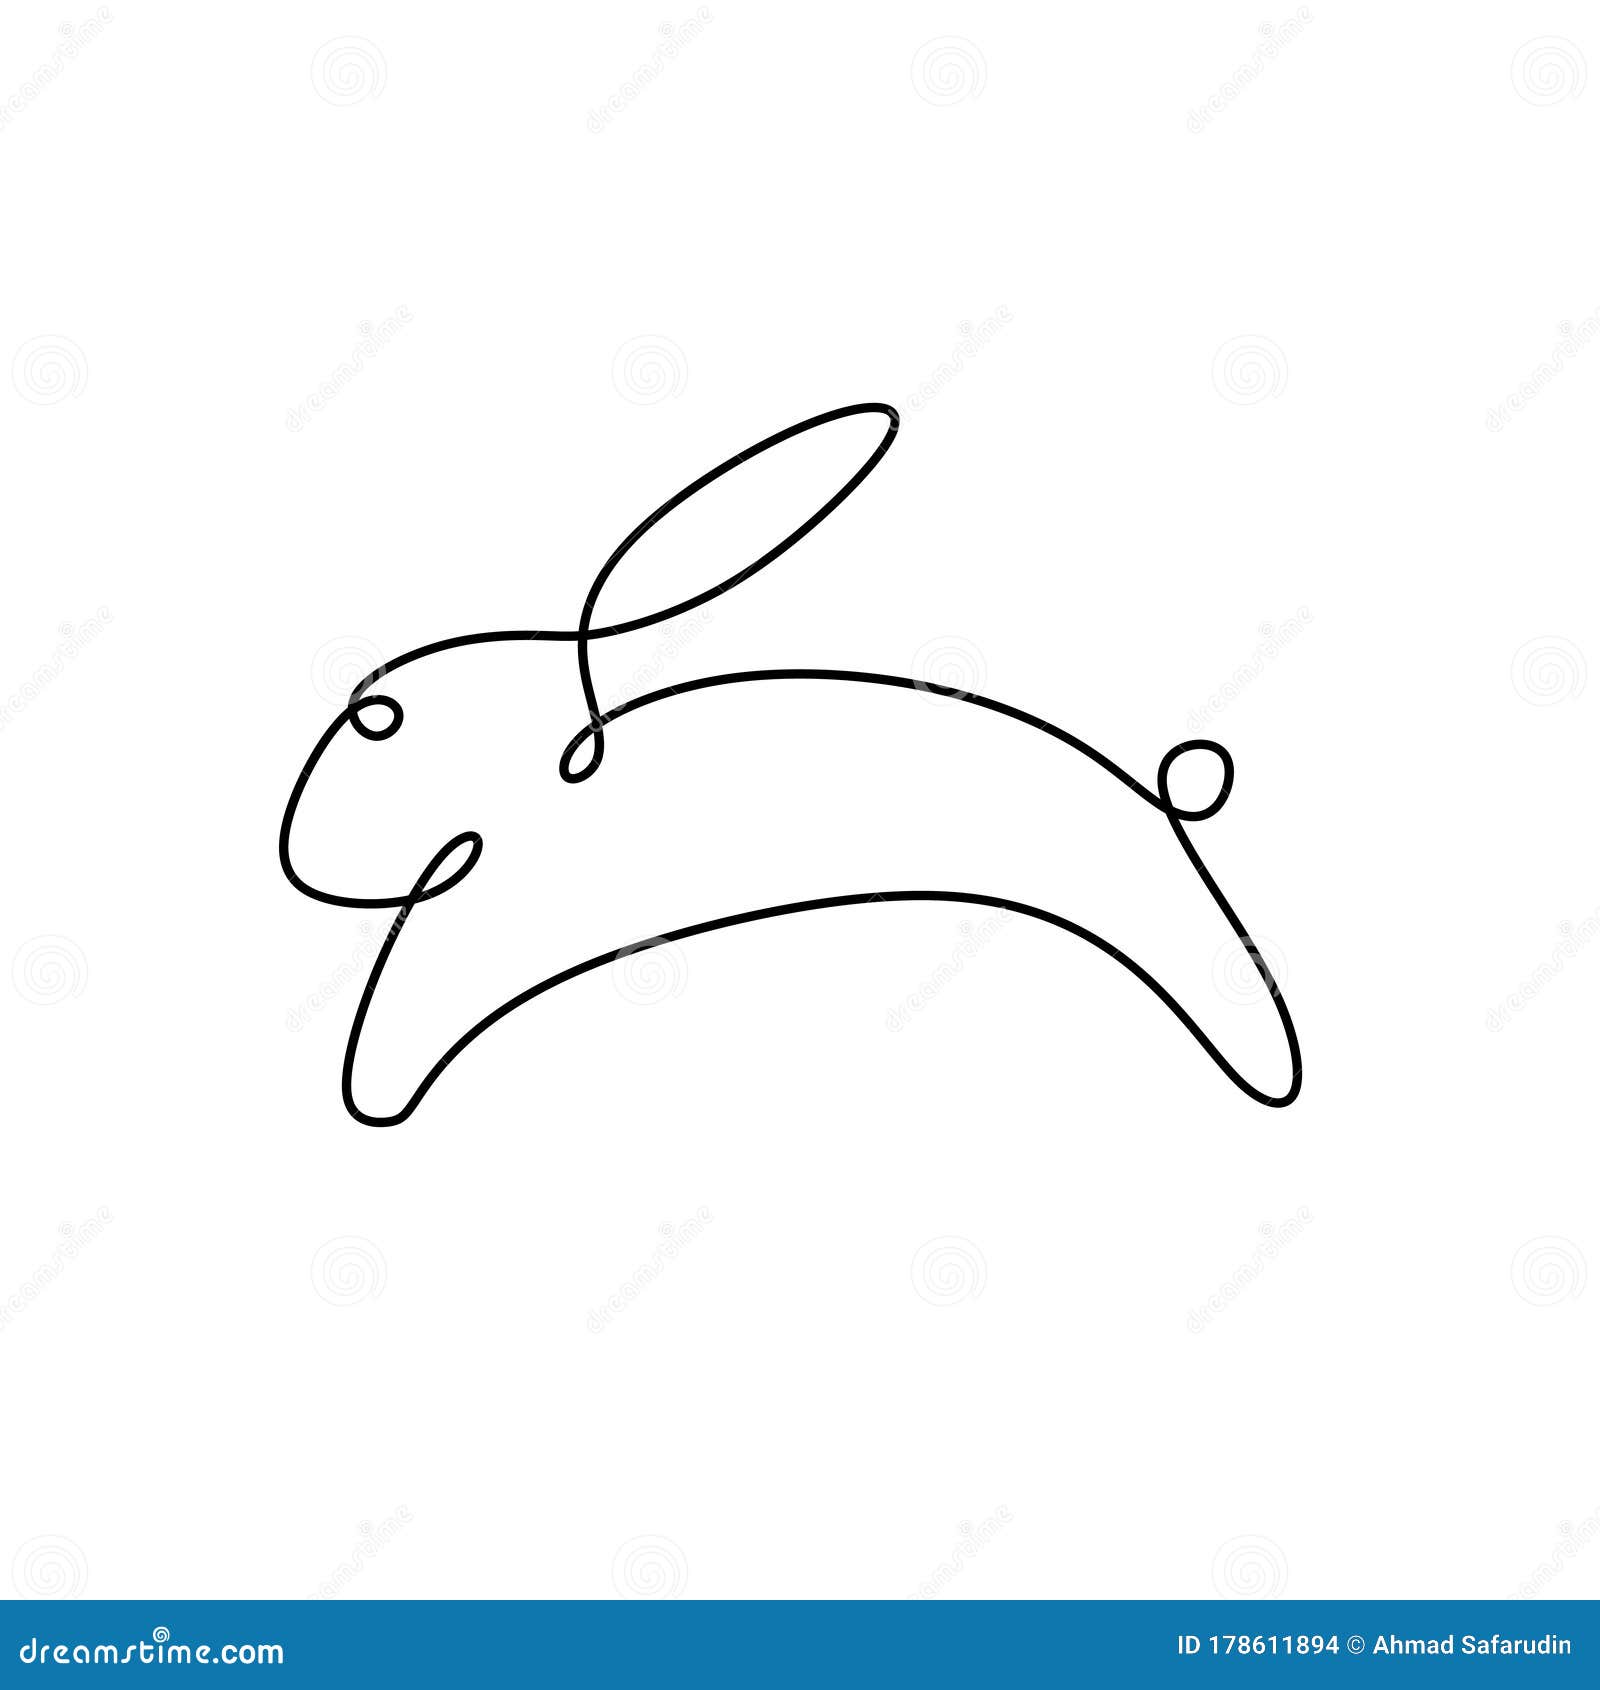 Rabbit Continuous One Line Drawing, Vector Illustration Minimalism Stock  Vector - Illustration of bunny, icon: 178611894